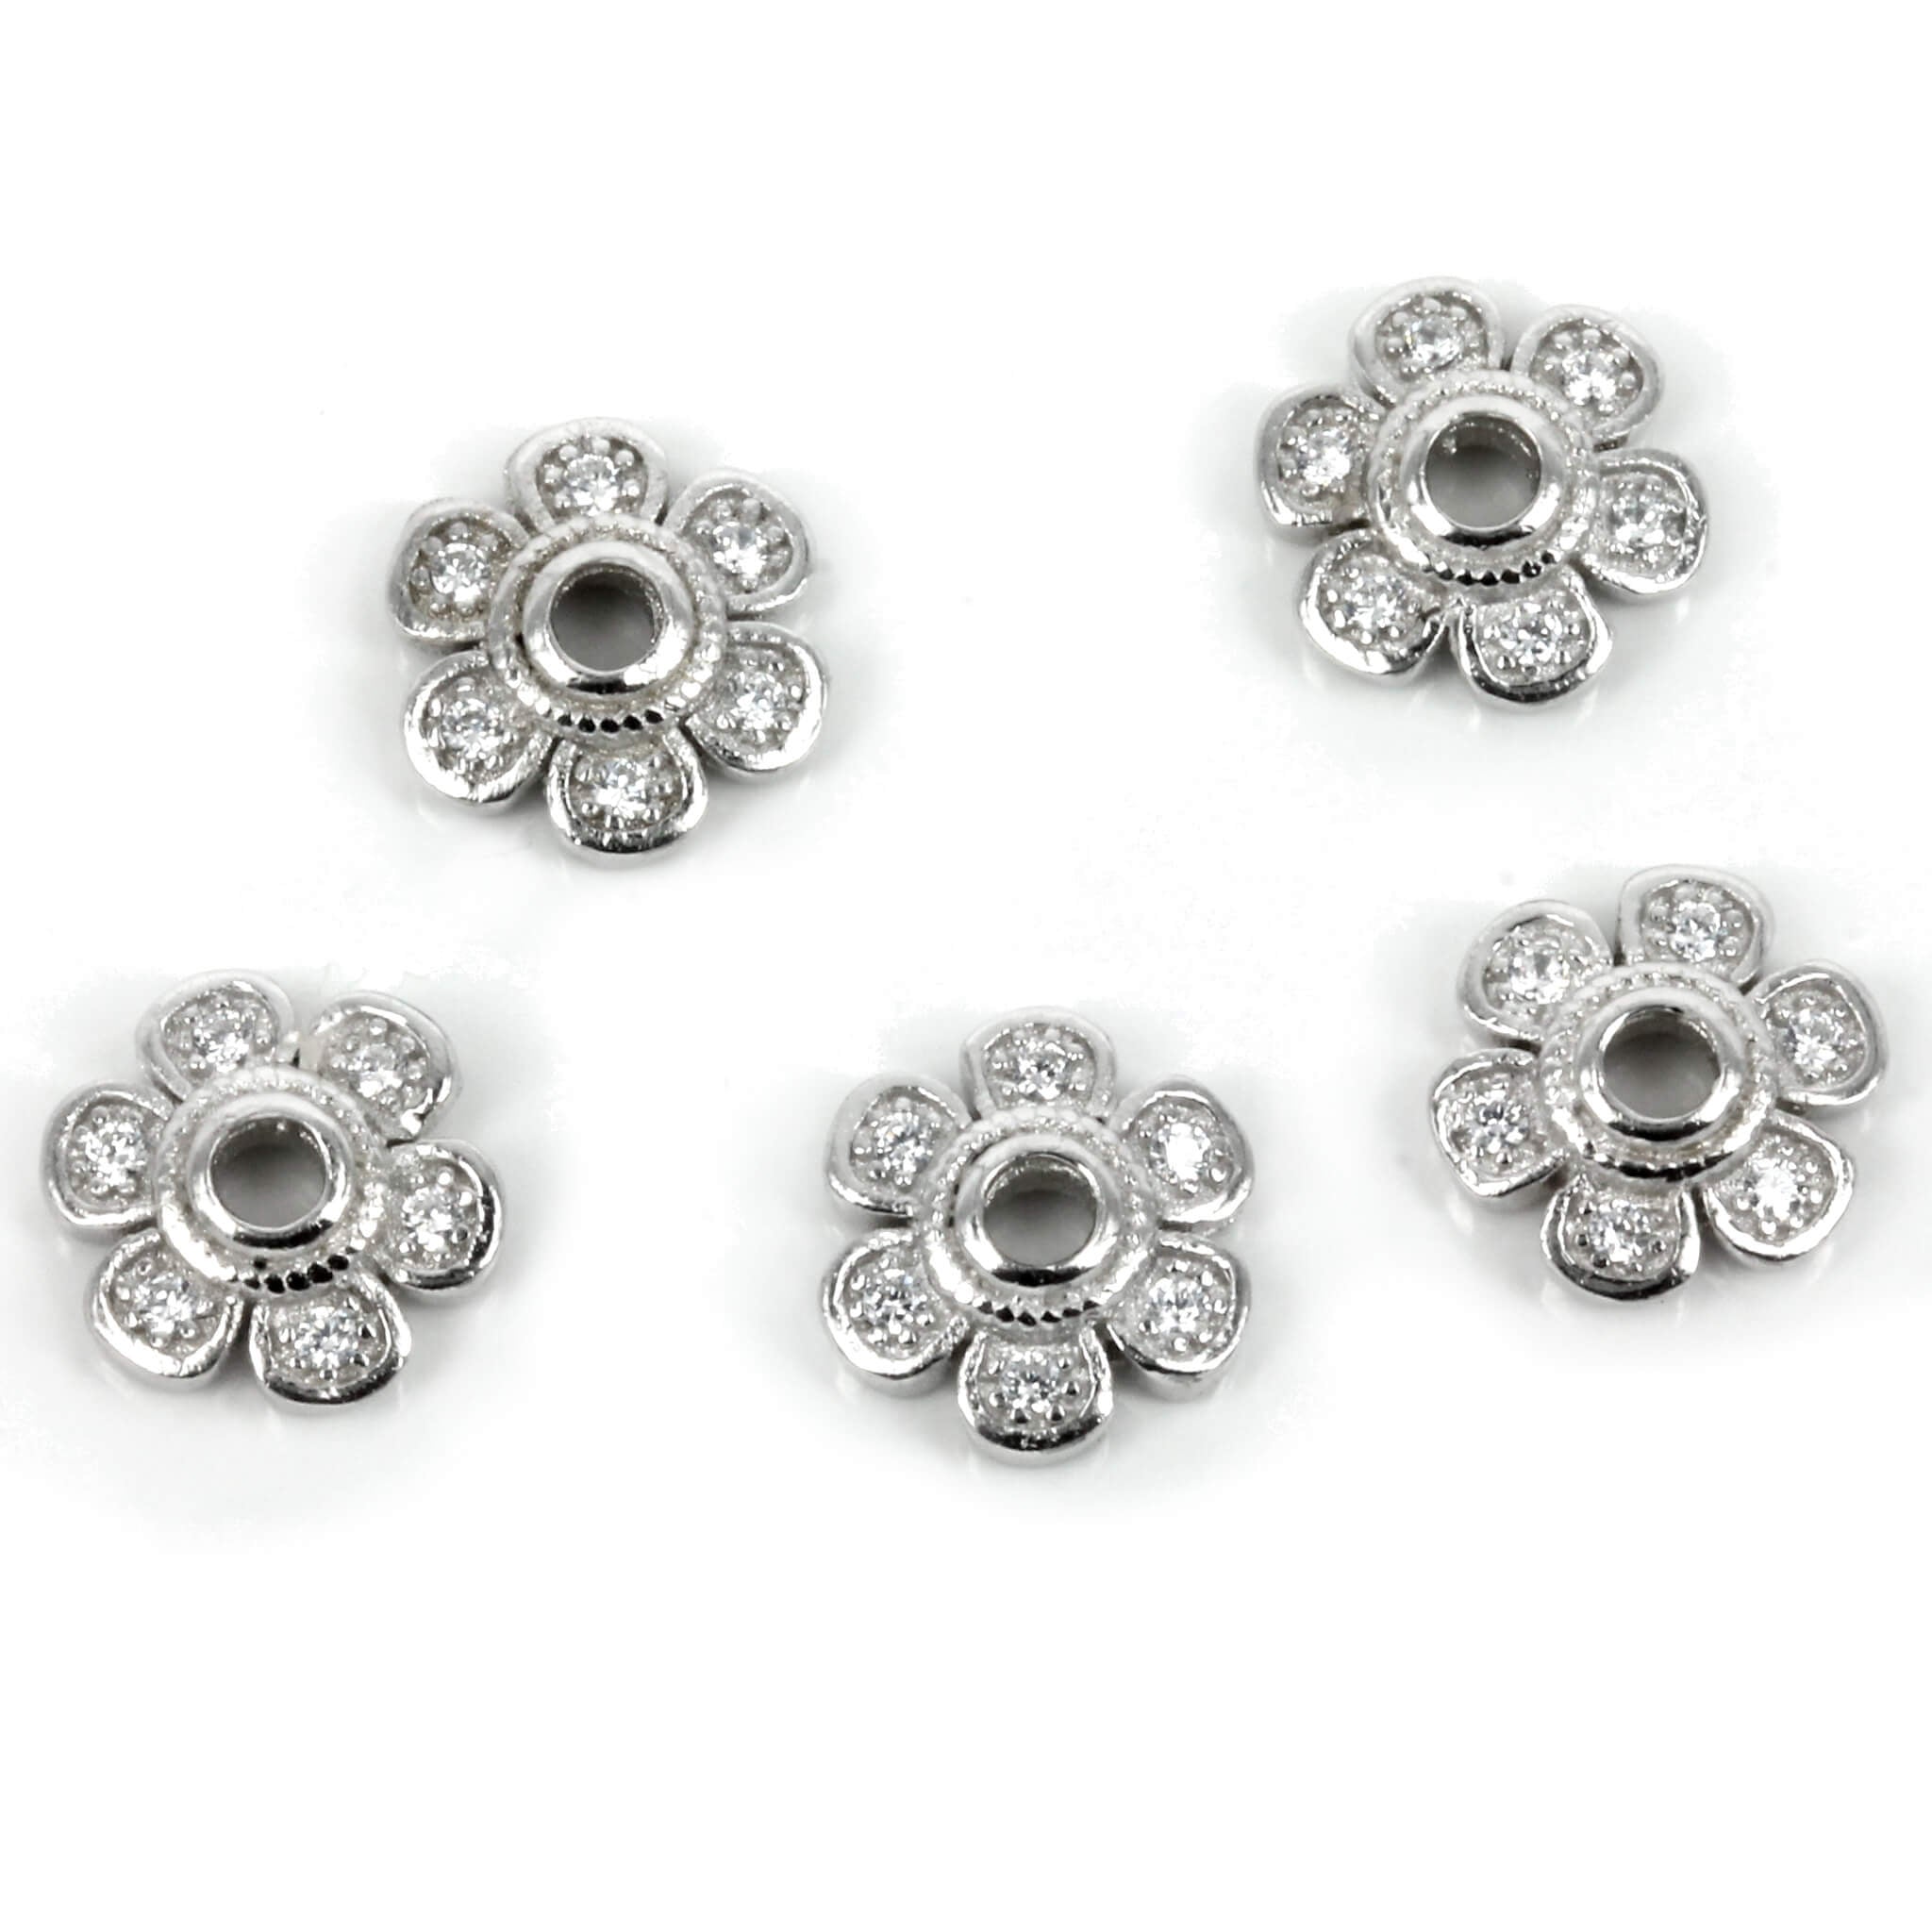 Flower Bead Cap with Cubic Zirconia Petals in Sterling Silver 9mm